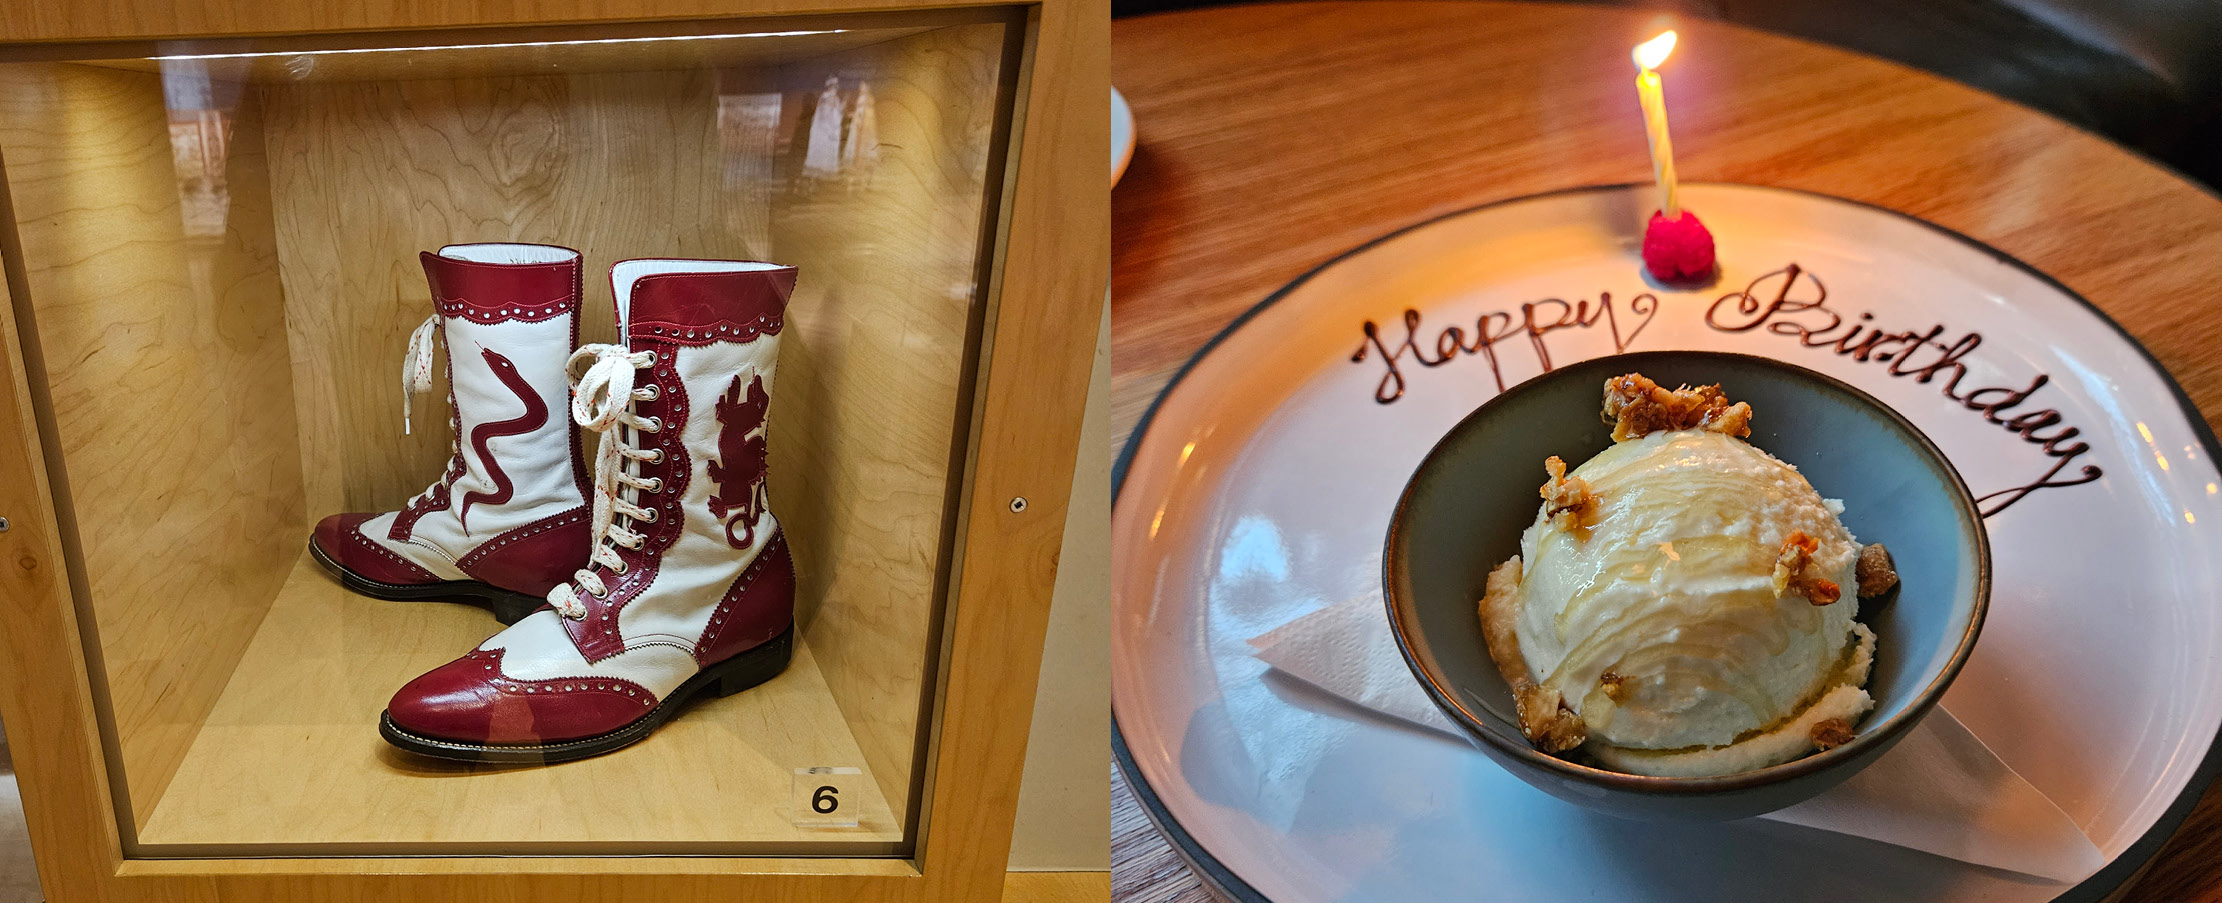 Left photo: boots in display case; right photo: ice cream with candle